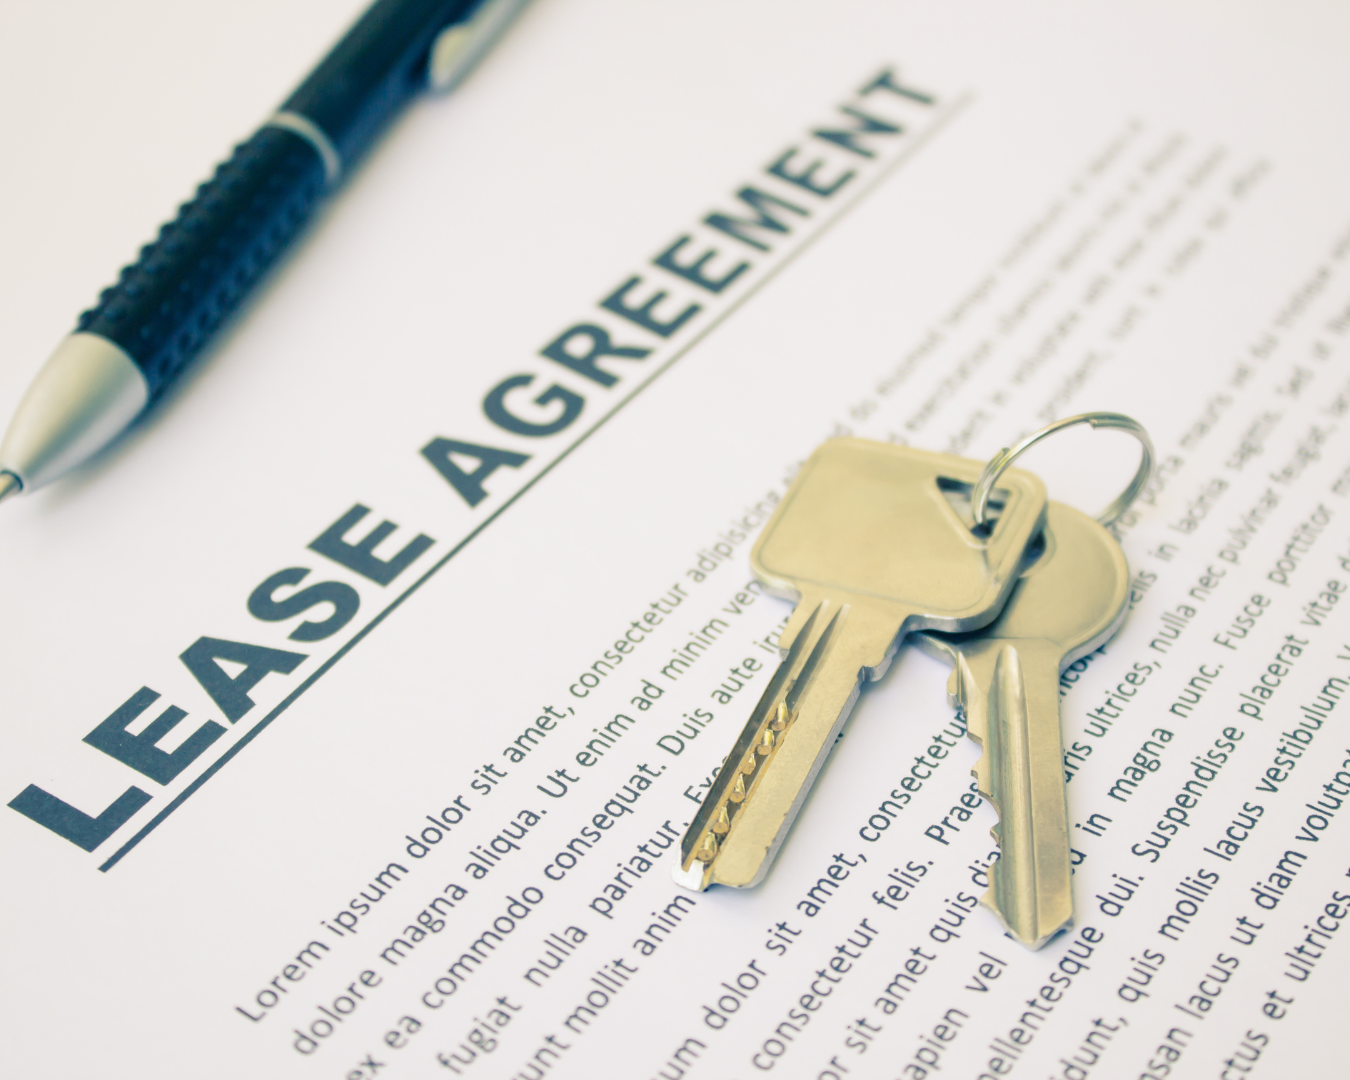 lease-agreement-with-keys